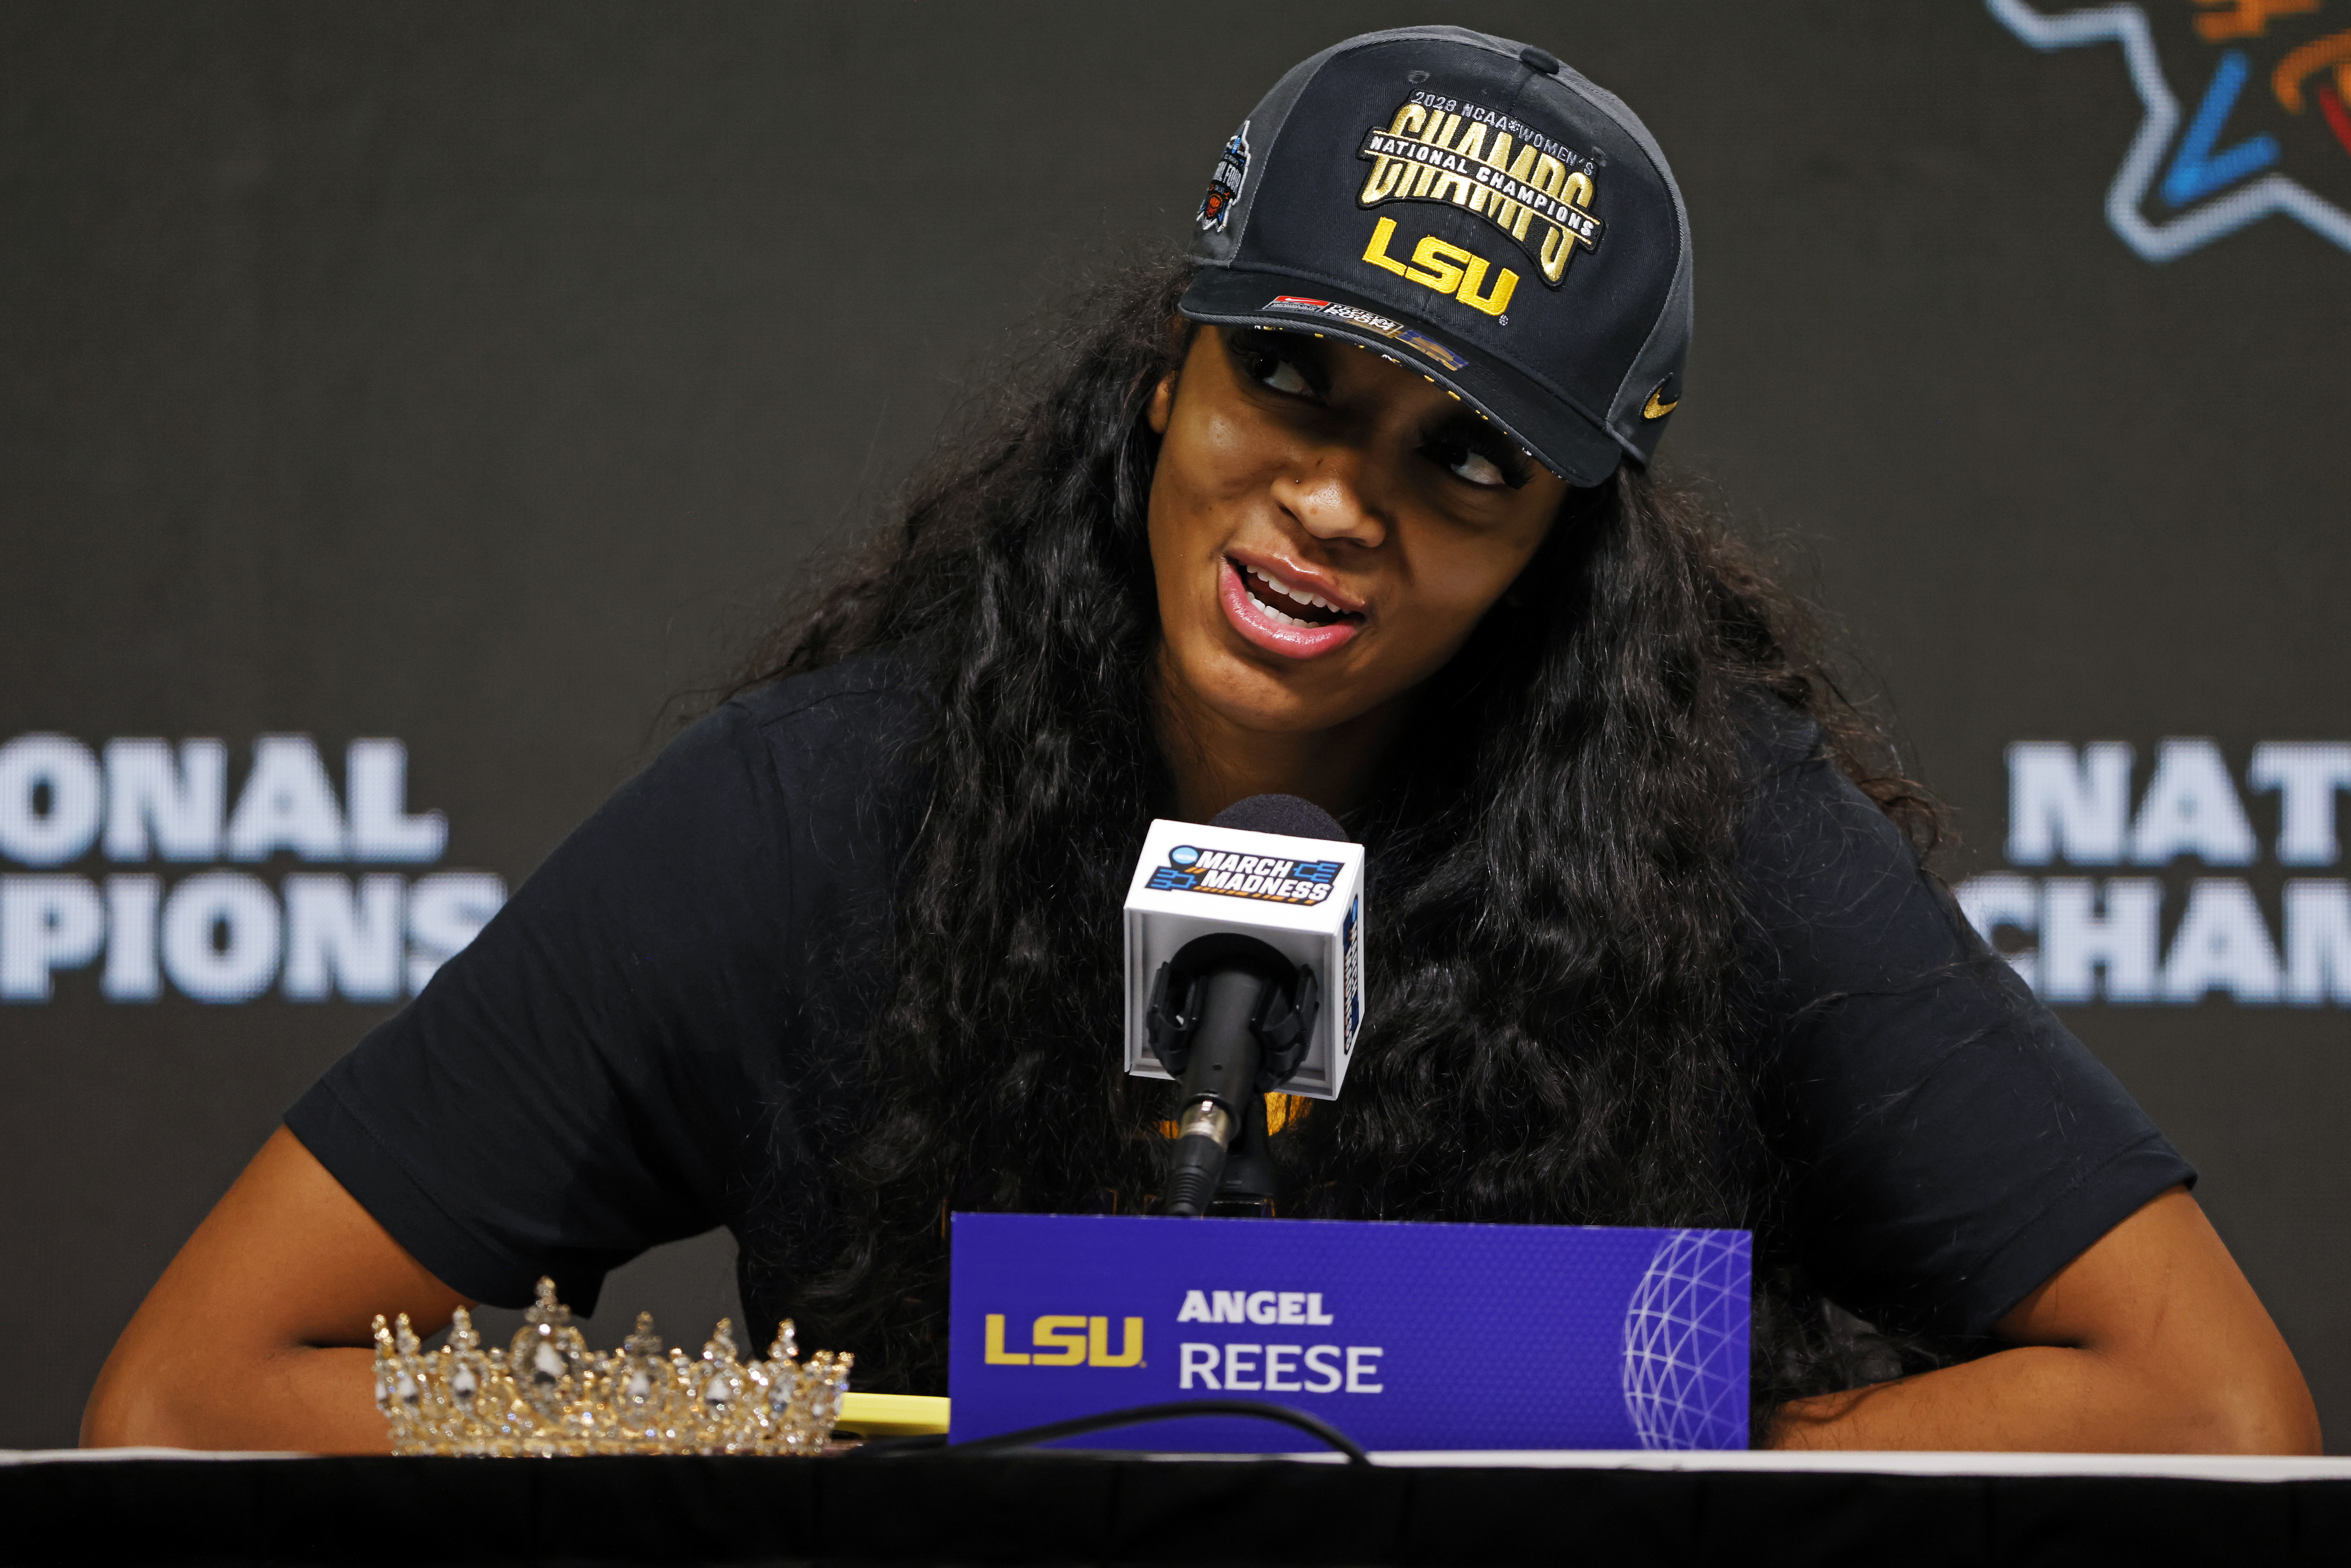 DALLAS, TEXAS - APRIL 02: Angel Reese #10 of the LSU Lady Tigers speaks during a press conference after the LSU Lady Tigers beat the Iowa Hawkeyes 102-85 during the 2023 NCAA Women's Basketball Tournament championship game at American Airlines Center on April 02, 2023 in Dallas, Texas. (Photo by Ron Jenkins/Getty Images)